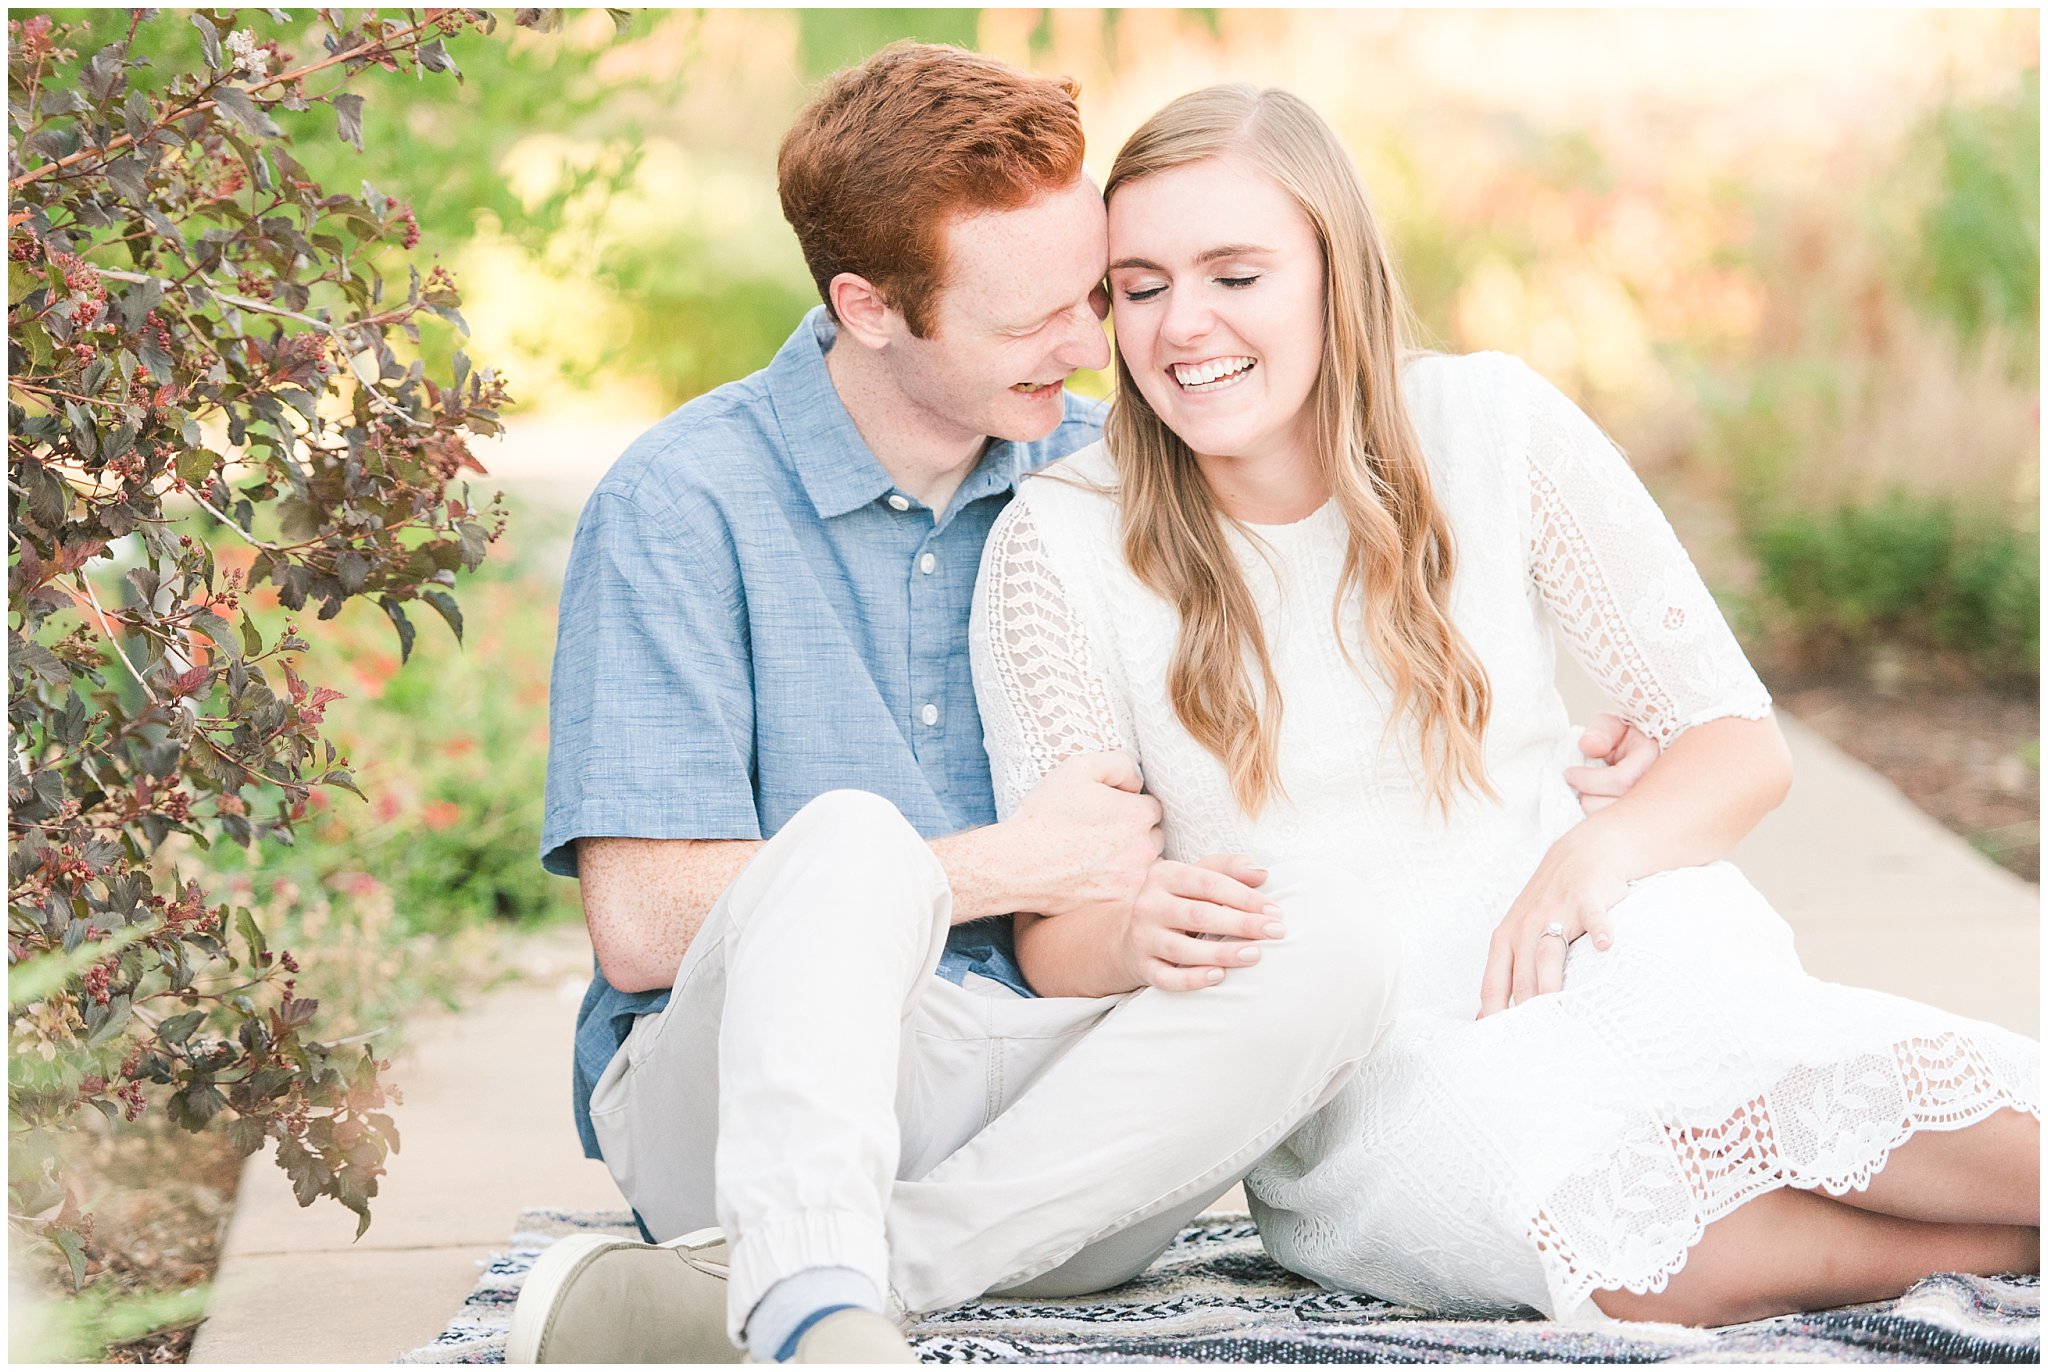 Couple wearing a white lace dress and light blue shirt during candid engagement photos in a Utah garden with flowers and a pond | Kaysville Botanical Garden Engagement | Utah Engagement | Jessie and Dallin Photography